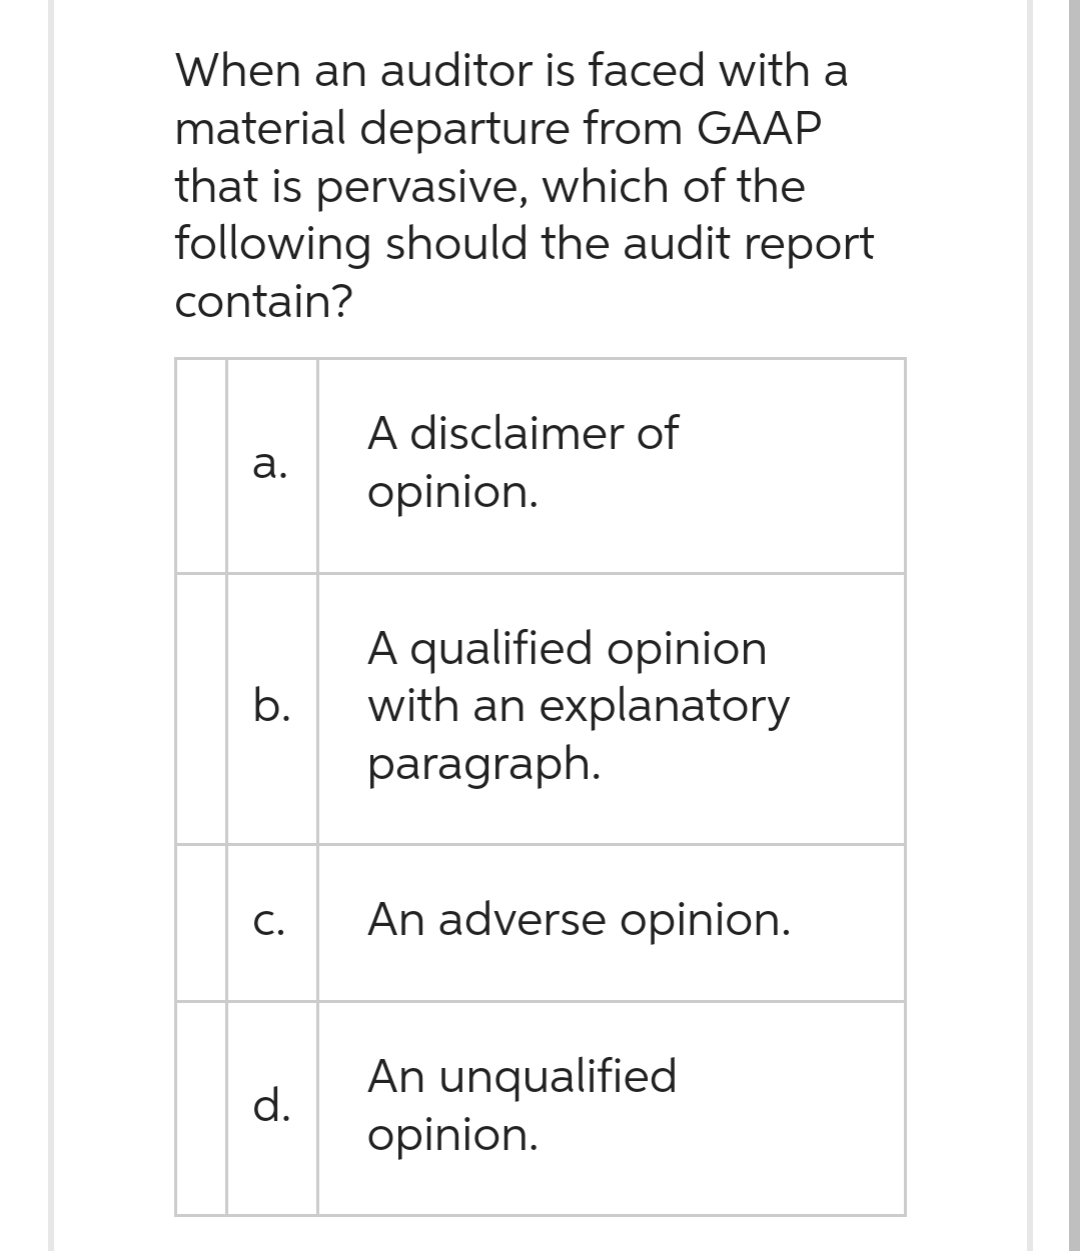 When an auditor is faced with a
material departure from GAAP
that is pervasive, which of the
following should the audit report
contain?
a.
b.
C.
d.
A disclaimer of
opinion.
A qualified opinion
with an explanatory
paragraph.
An adverse opinion.
An unqualified
opinion.